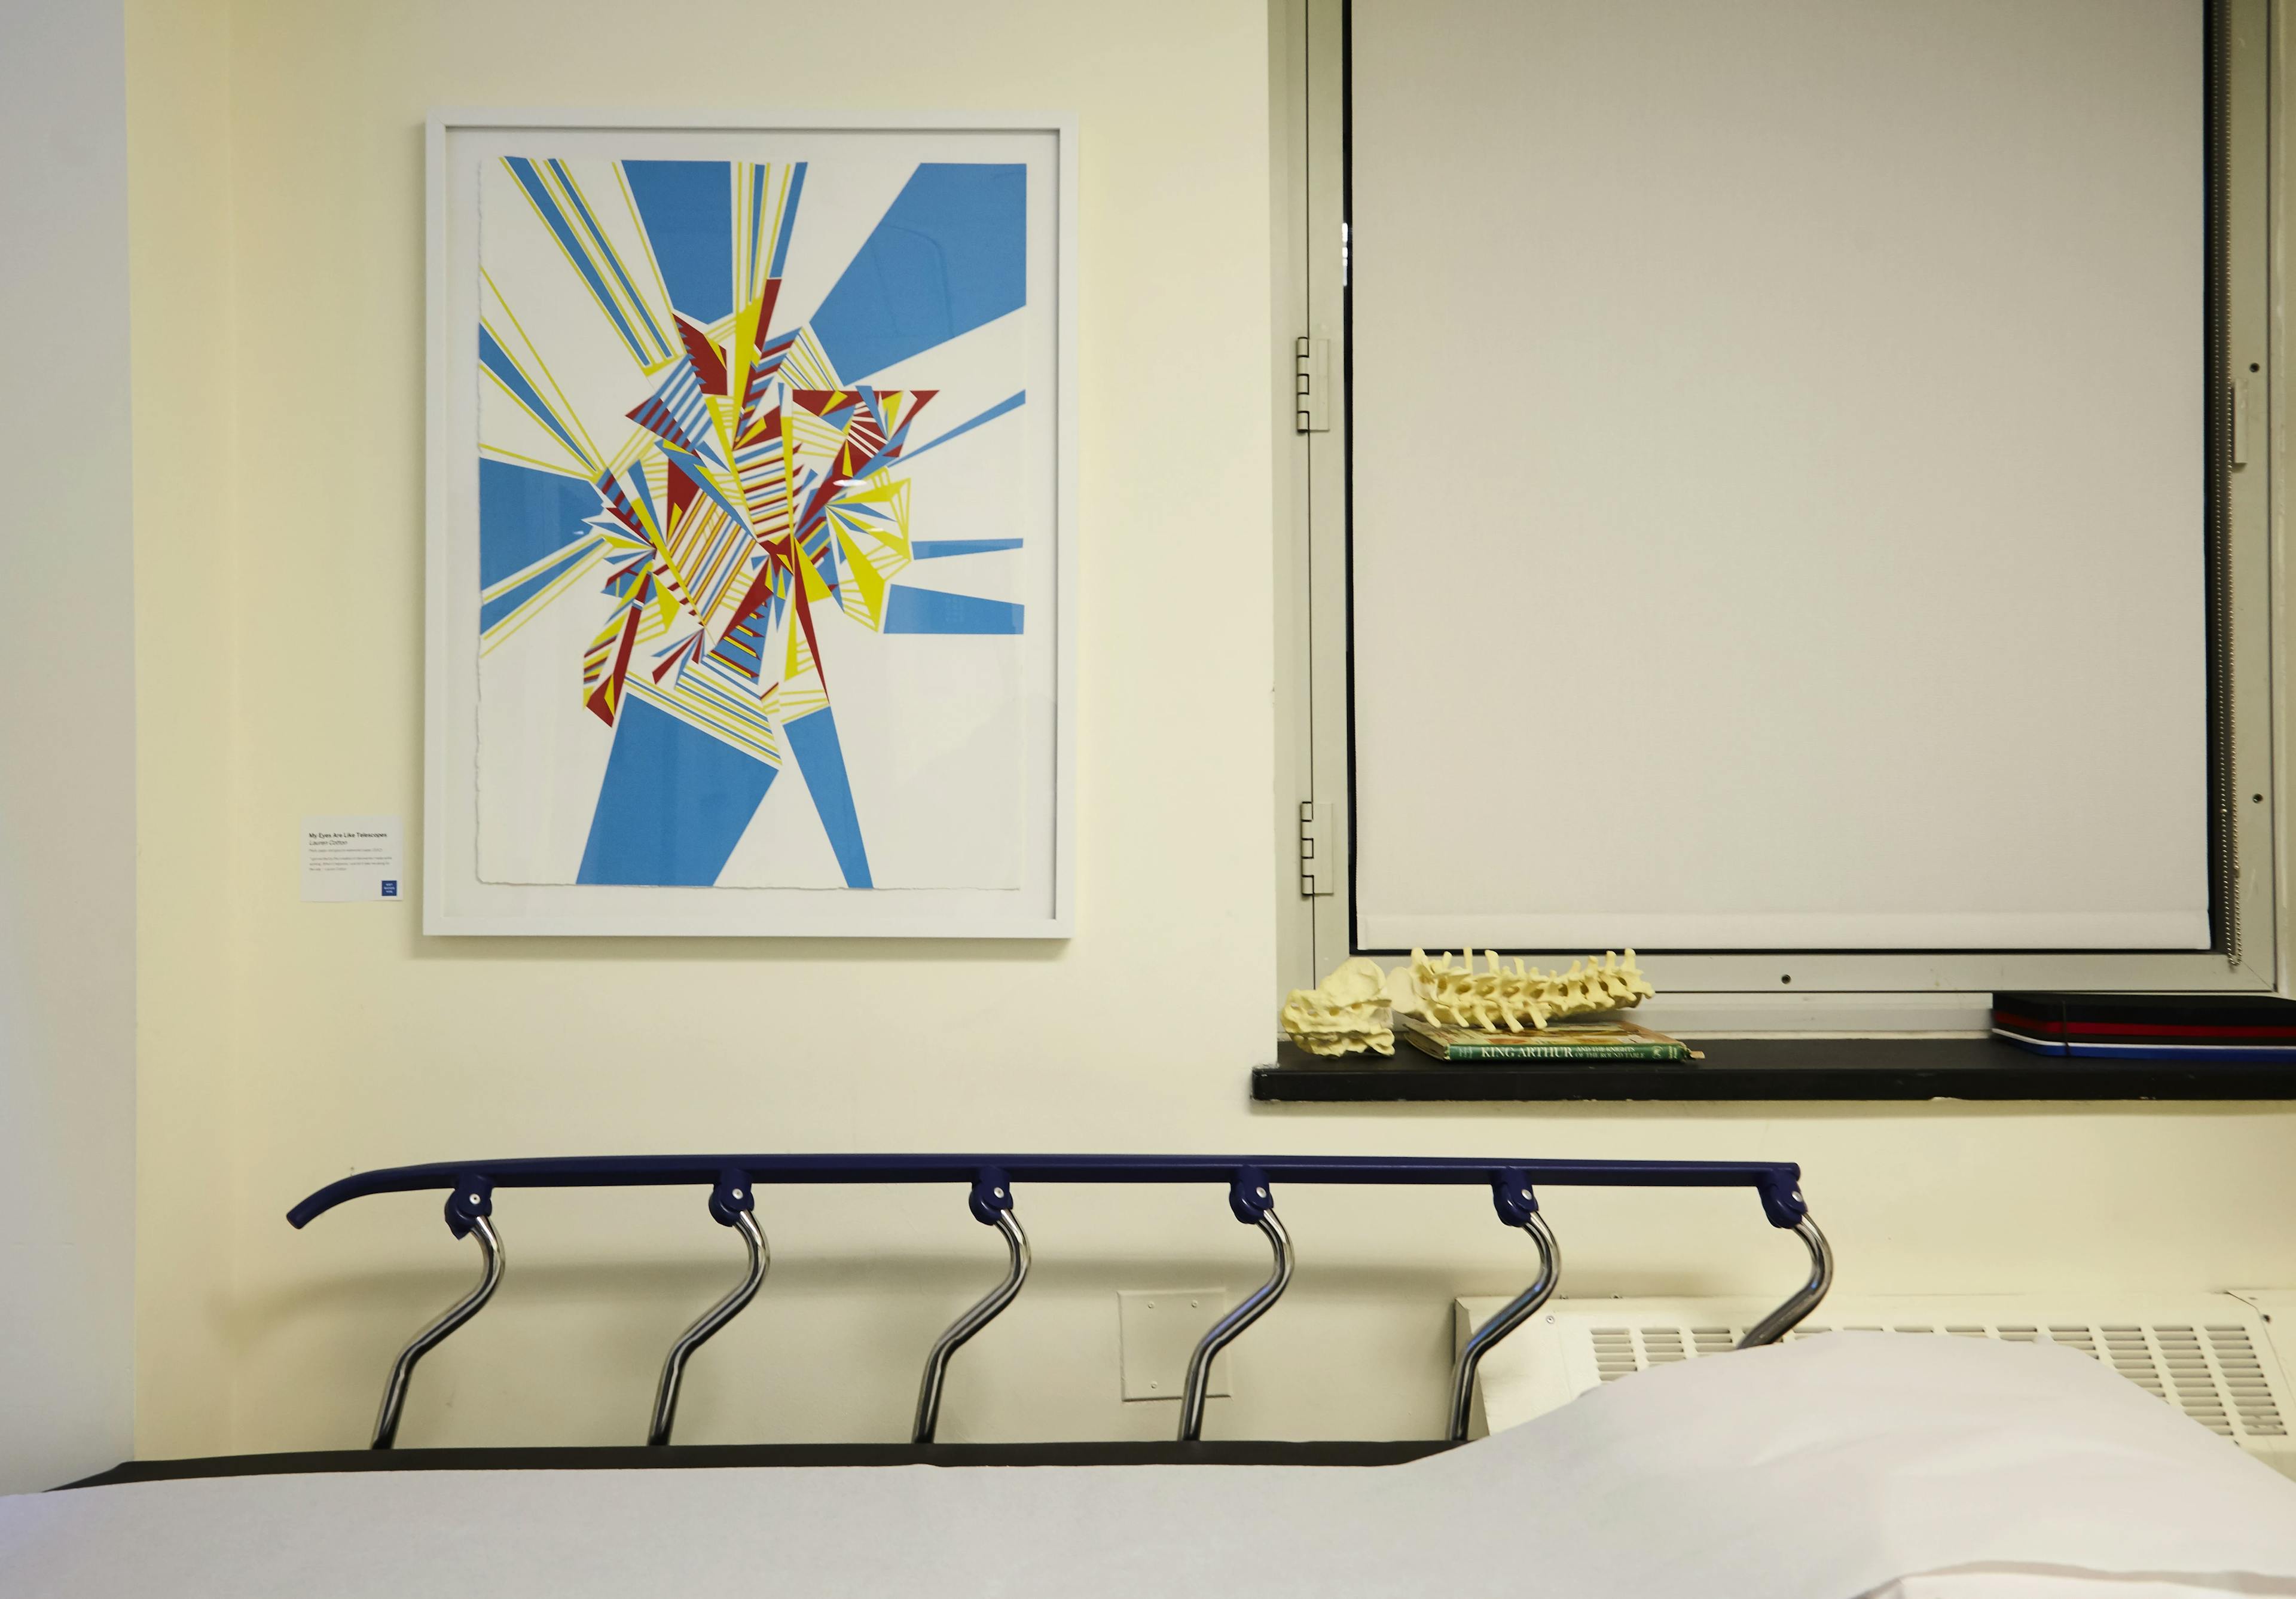 Multicolored, geometric abstract collage on paper installed above a hospital bed with railings.